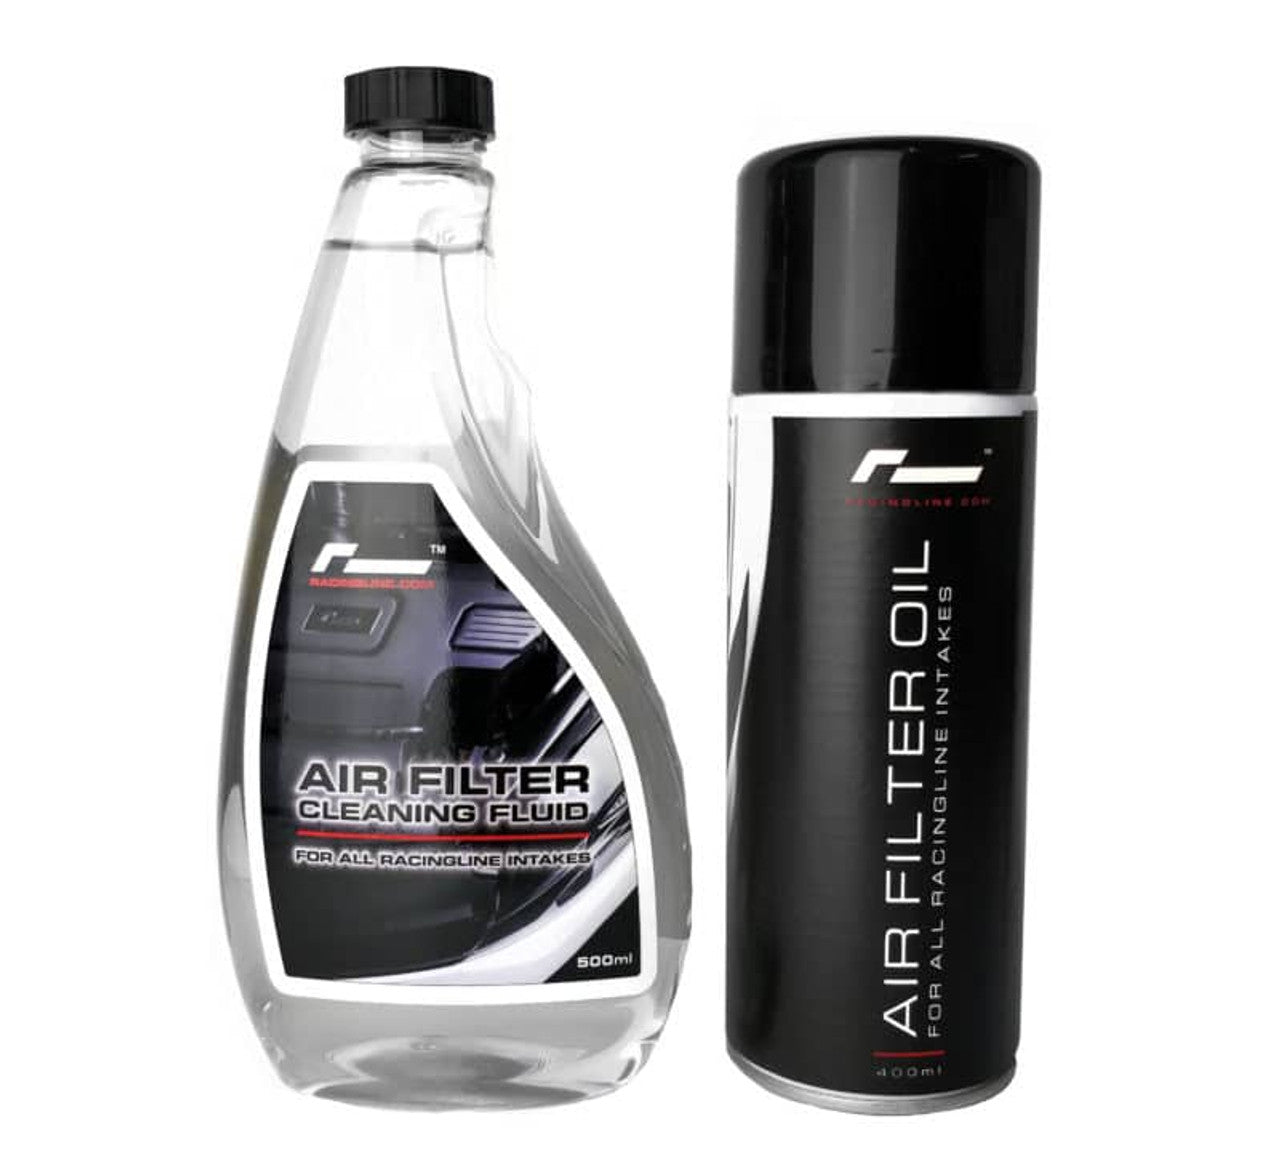 Racingline Performance Air Filter Cleaning Kit